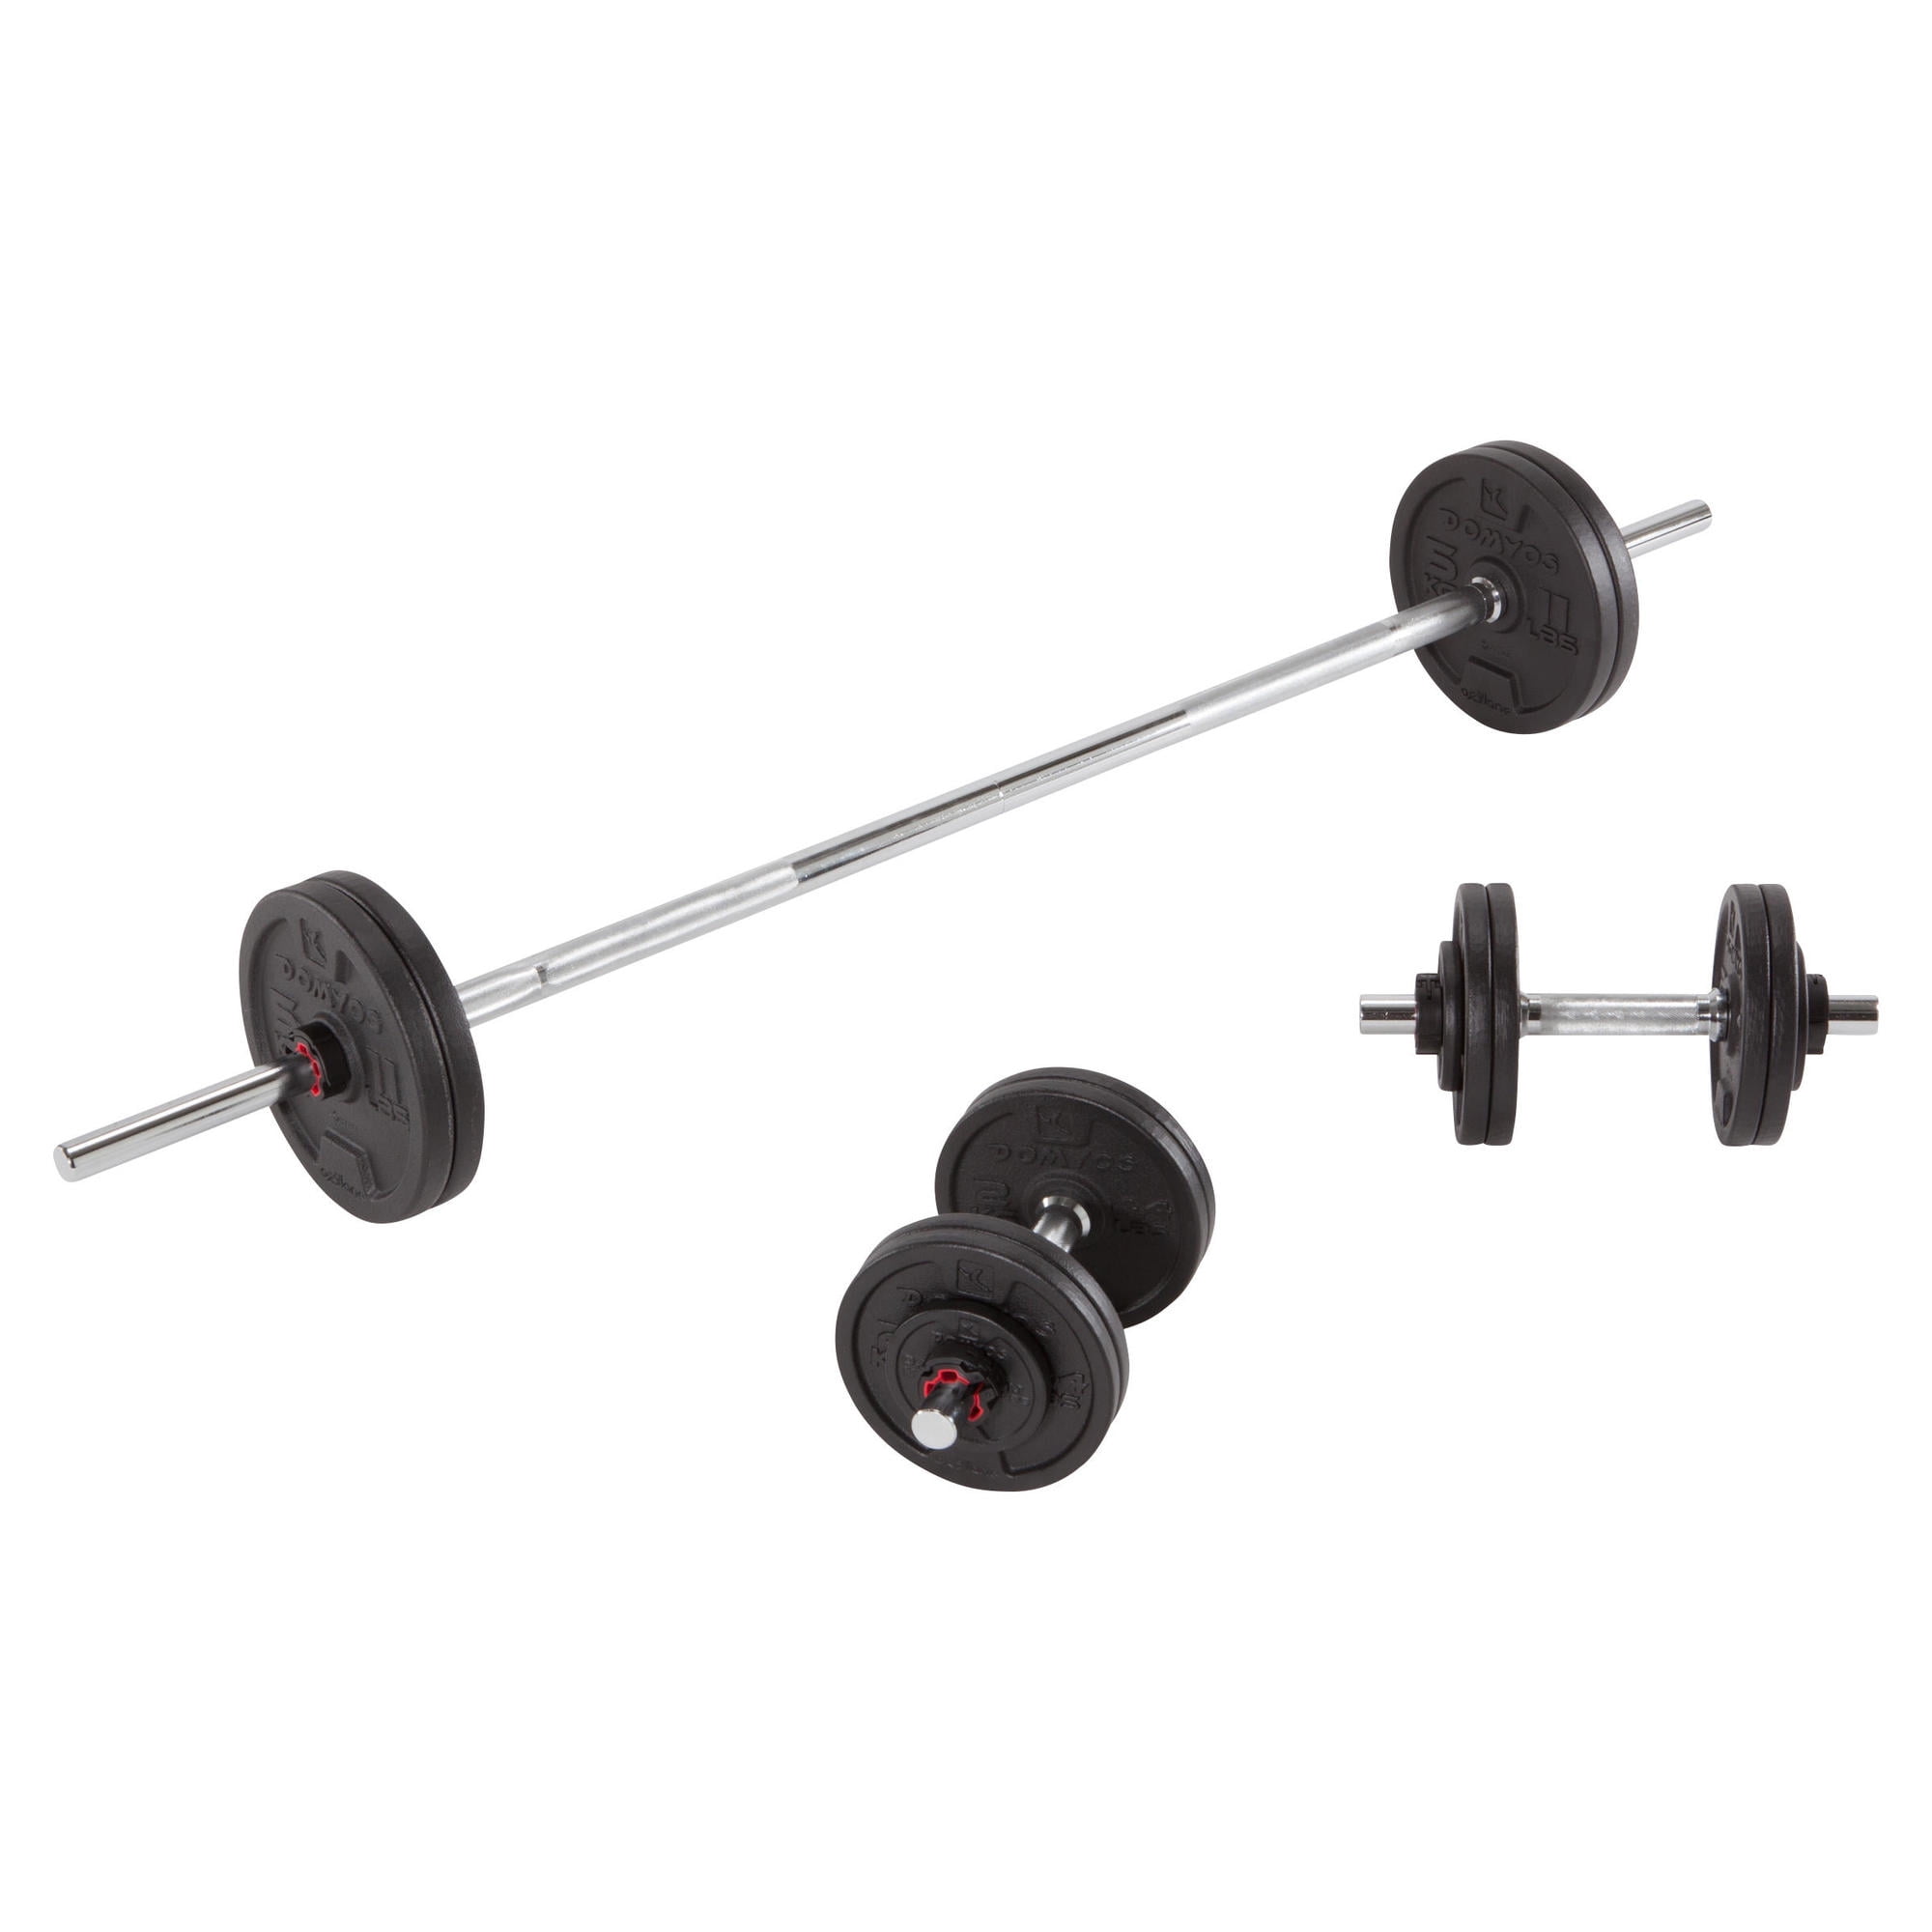 Weight Dumbbell Set 110 LB Adjustable Cap Gym Home Barbell Plates Body Workout 